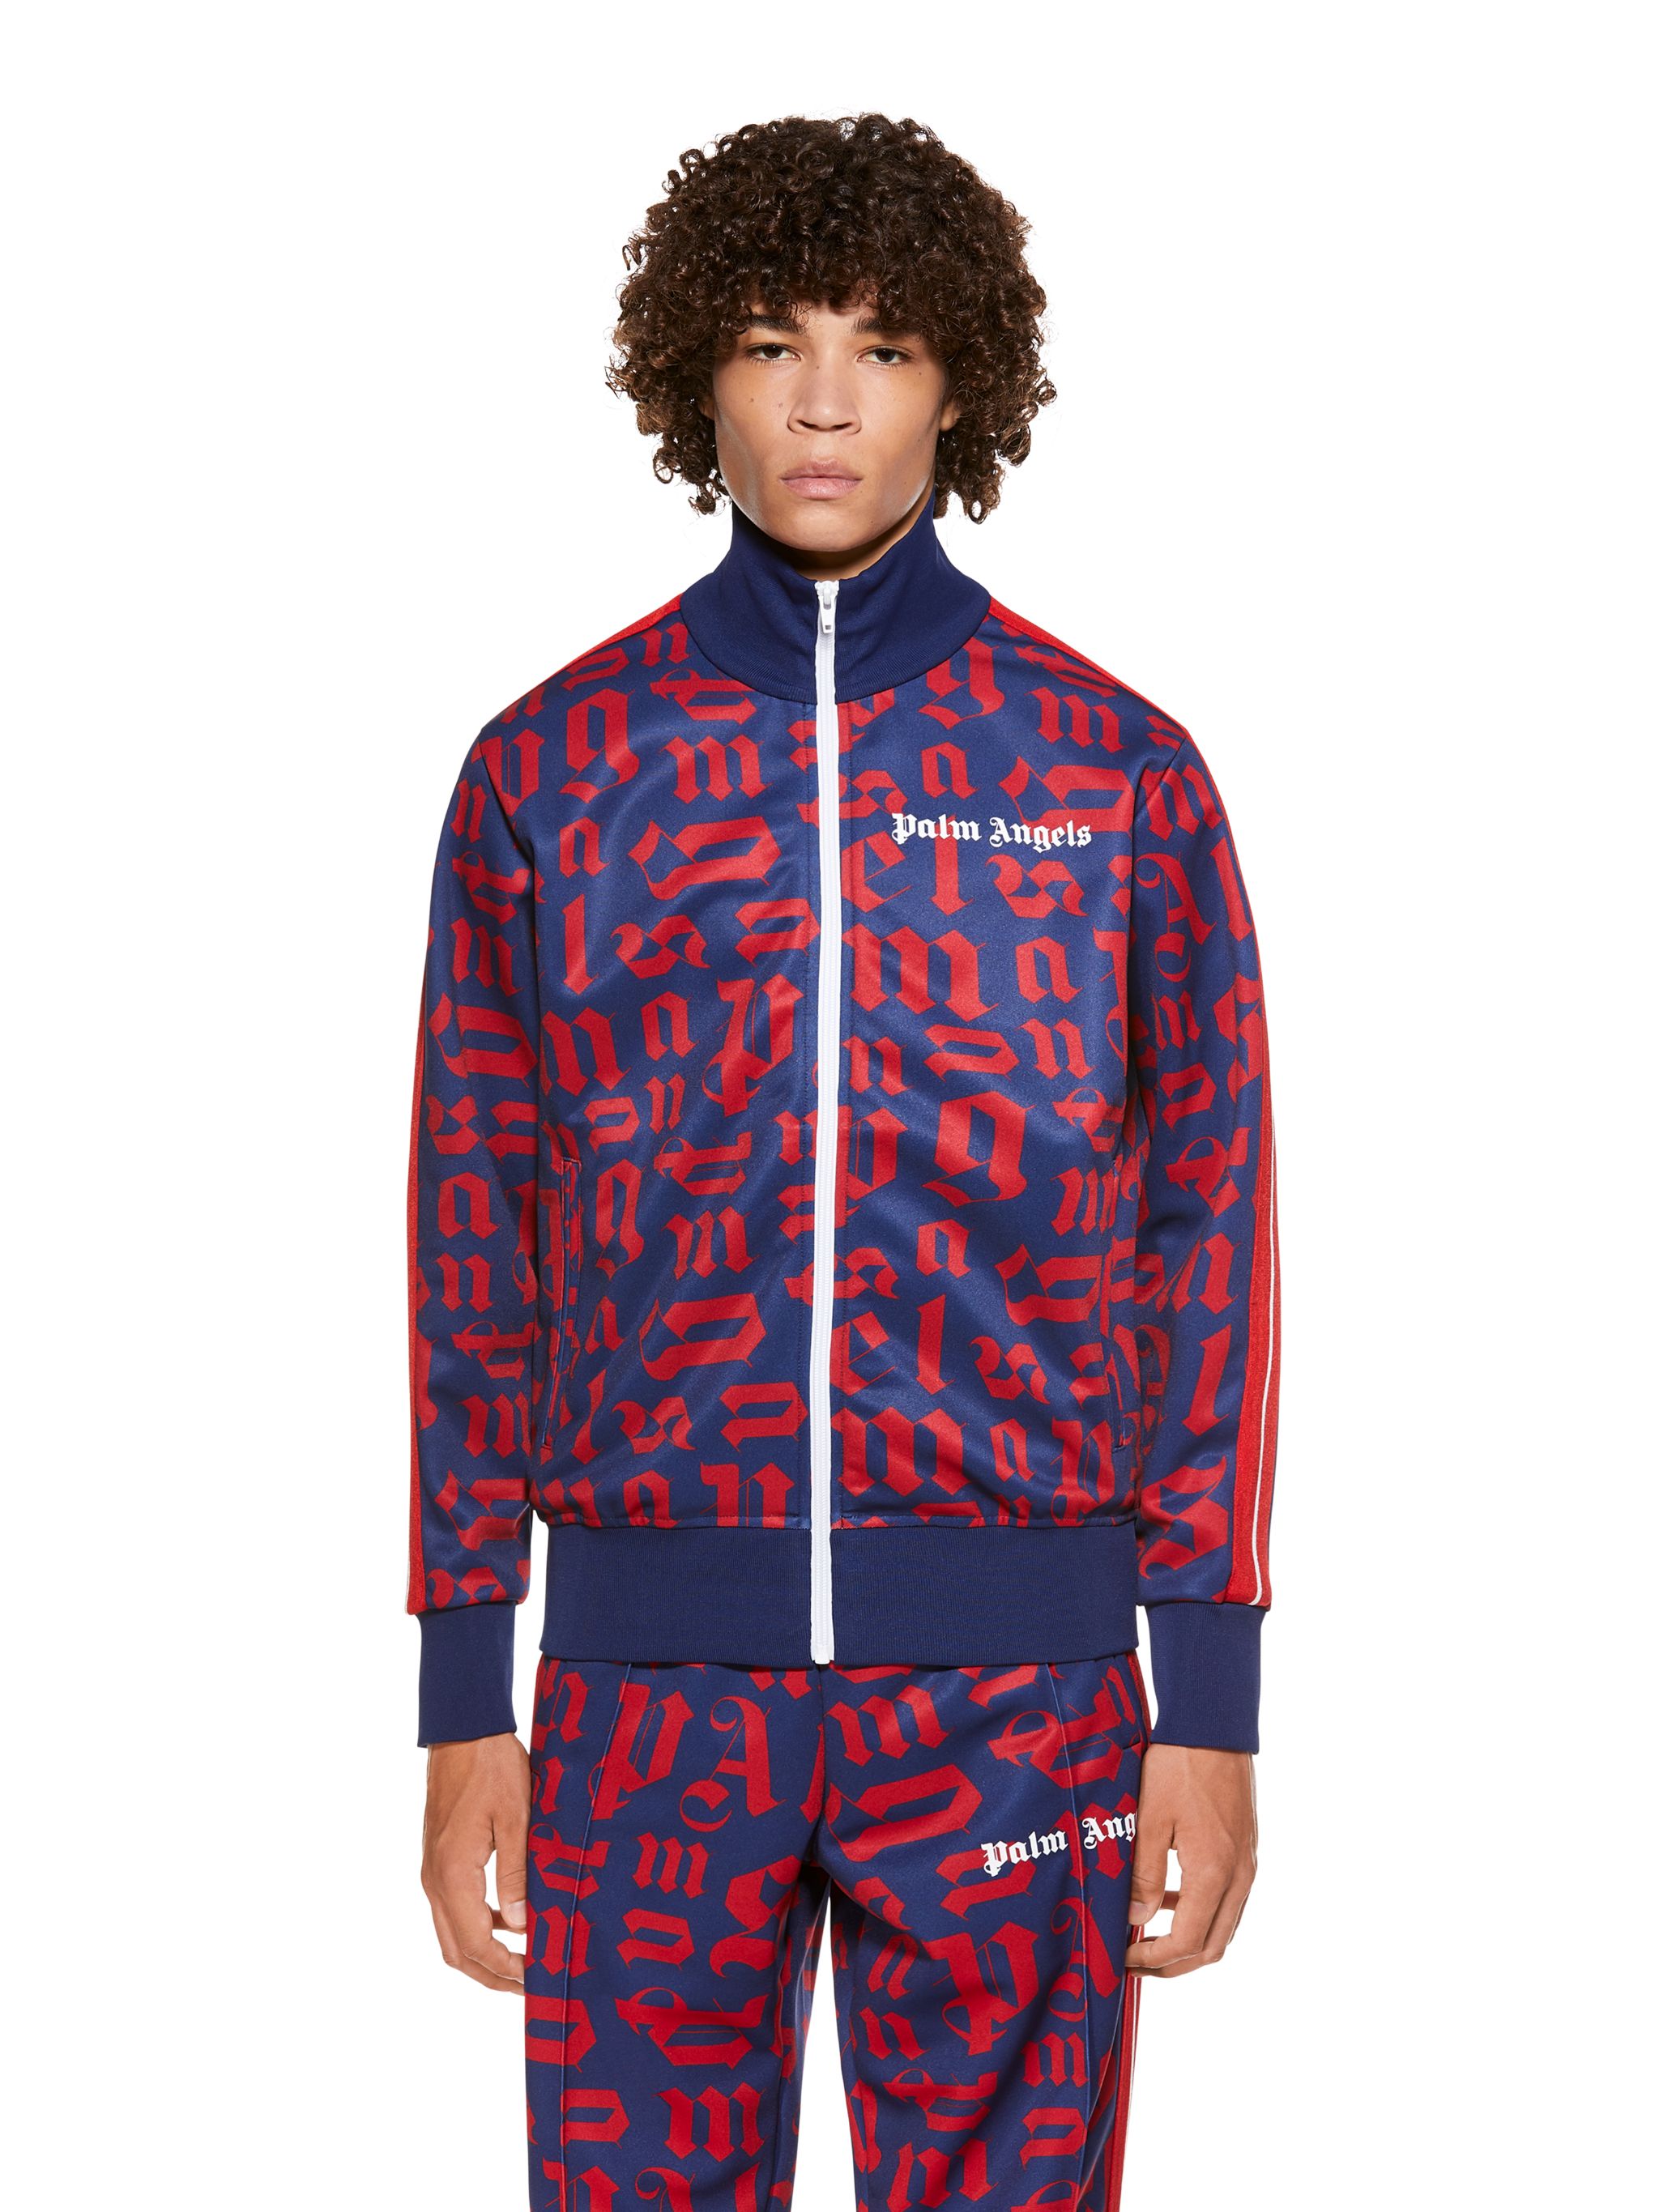 MONOGRAM MULTICOLOR TRACK JACKET in blue - Palm Angels® Official